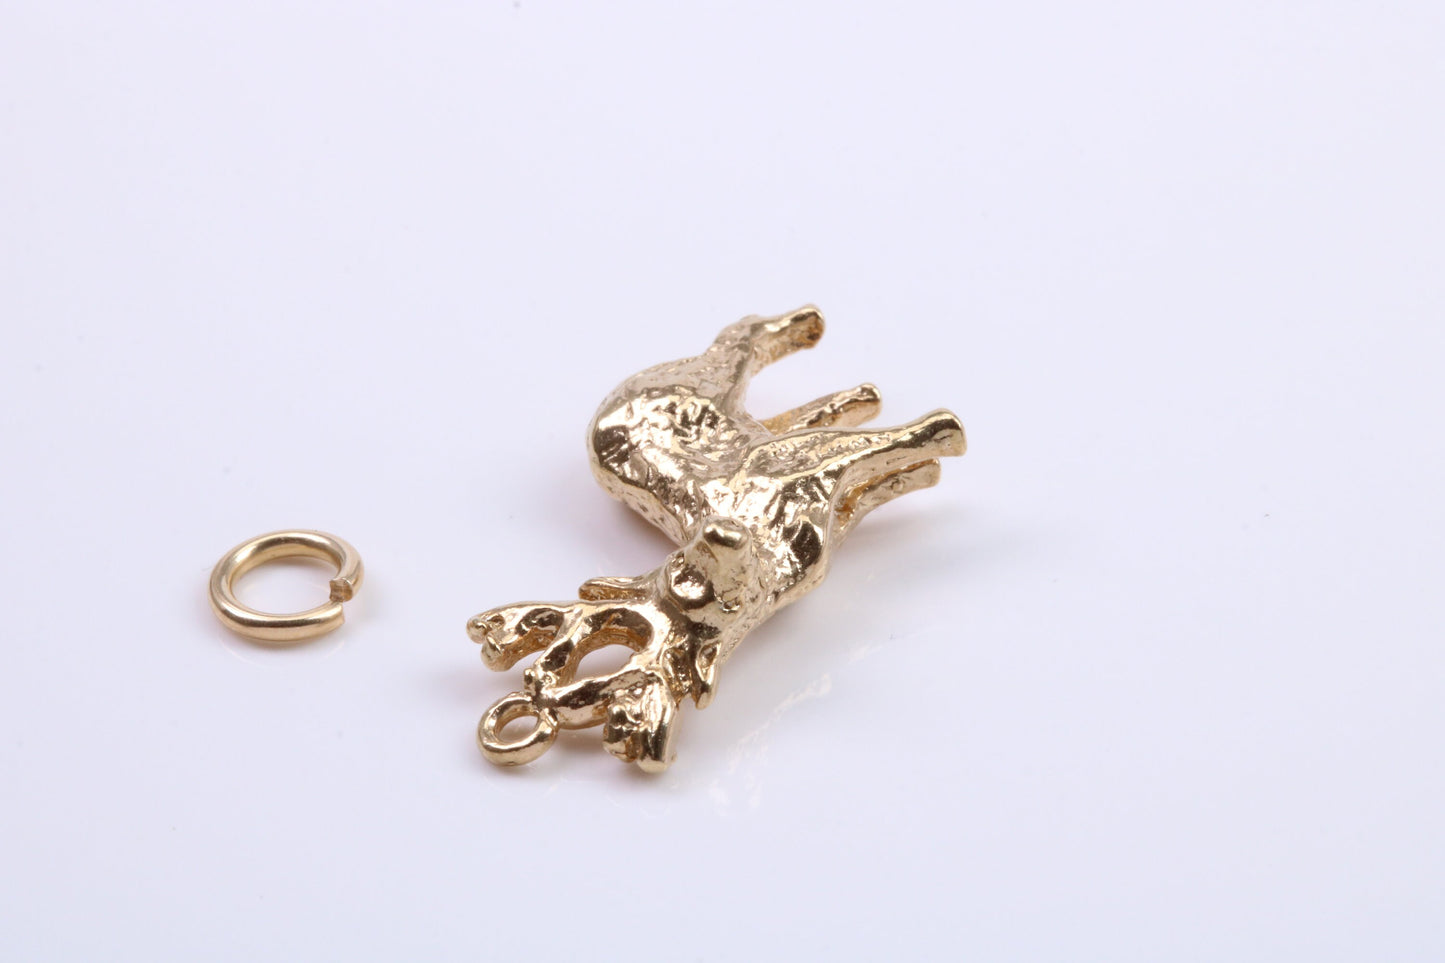 Deer Charm, Traditional Charm, Made from Solid 9ct Yellow Gold, British Hallmarked, Complete with Attachment Link